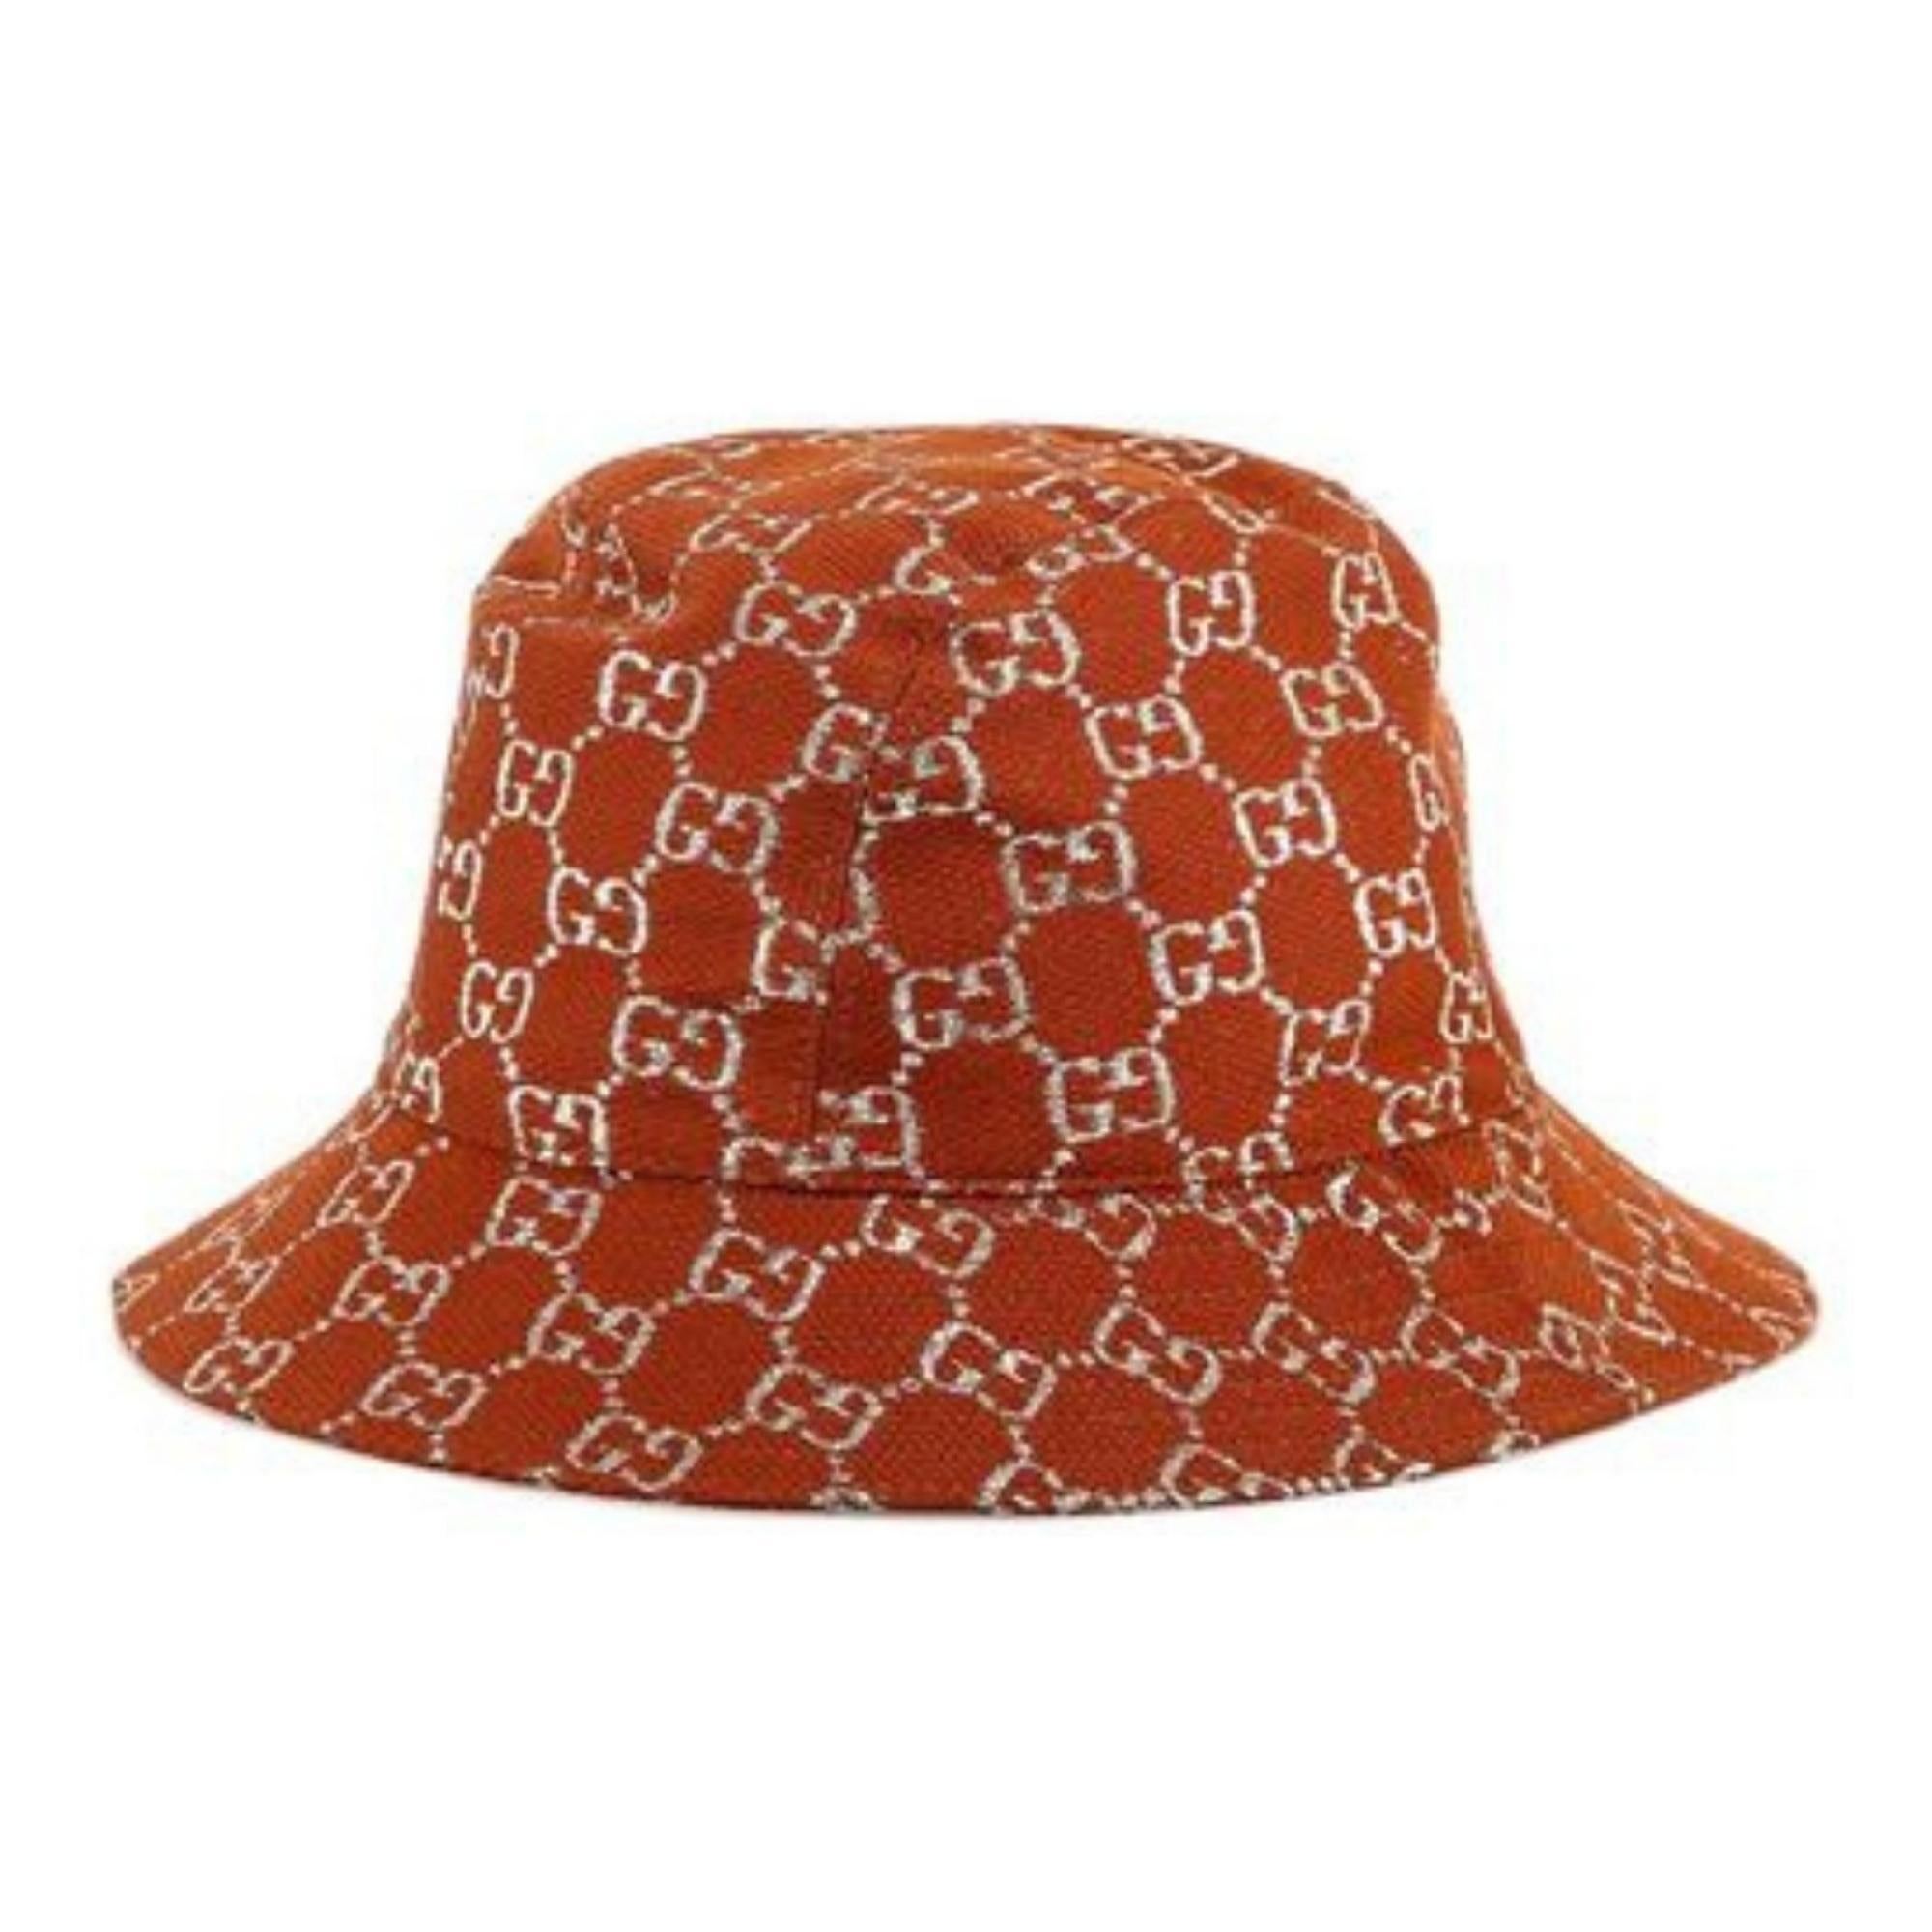 Brown/orange and silver-tone wool blend Gucci bucket hat with GG pattern and metallic accents throughout.

COLOR: Burnt Orange/Tan
MATERIAL: 71% Wool, 17% Polyamide, 12% Other Fibers
SIZE: Large 58 cm
ITEM CODE: 631951
COMES WITH: Tags
CONDITION: